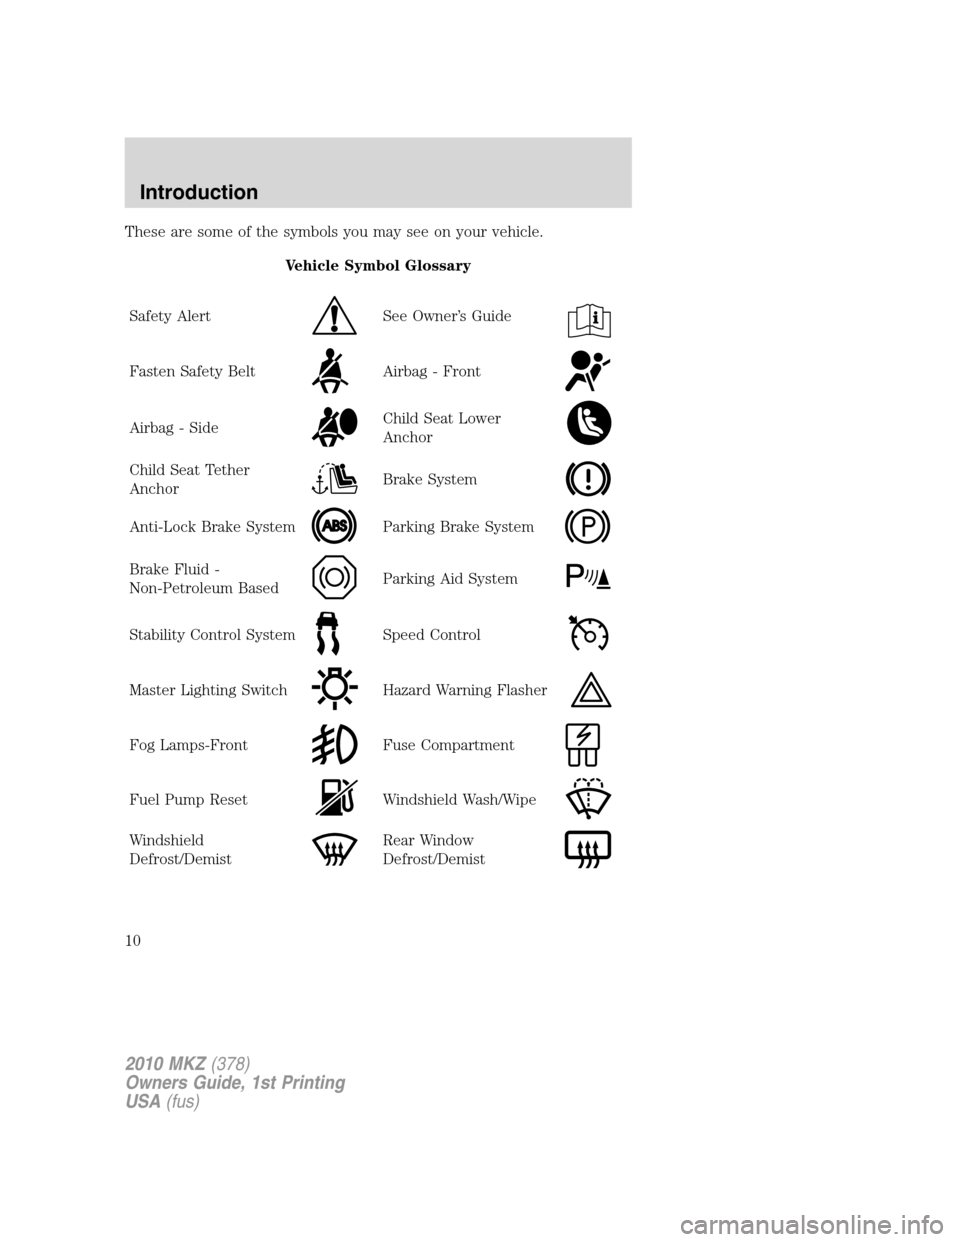 LINCOLN MKZ 2010  Owners Manual These are some of the symbols you may see on your vehicle.
Vehicle Symbol Glossary
Safety Alert
See Owner’s Guide
Fasten Safety BeltAirbag - Front
Airbag - SideChild Seat Lower
Anchor
Child Seat Tet